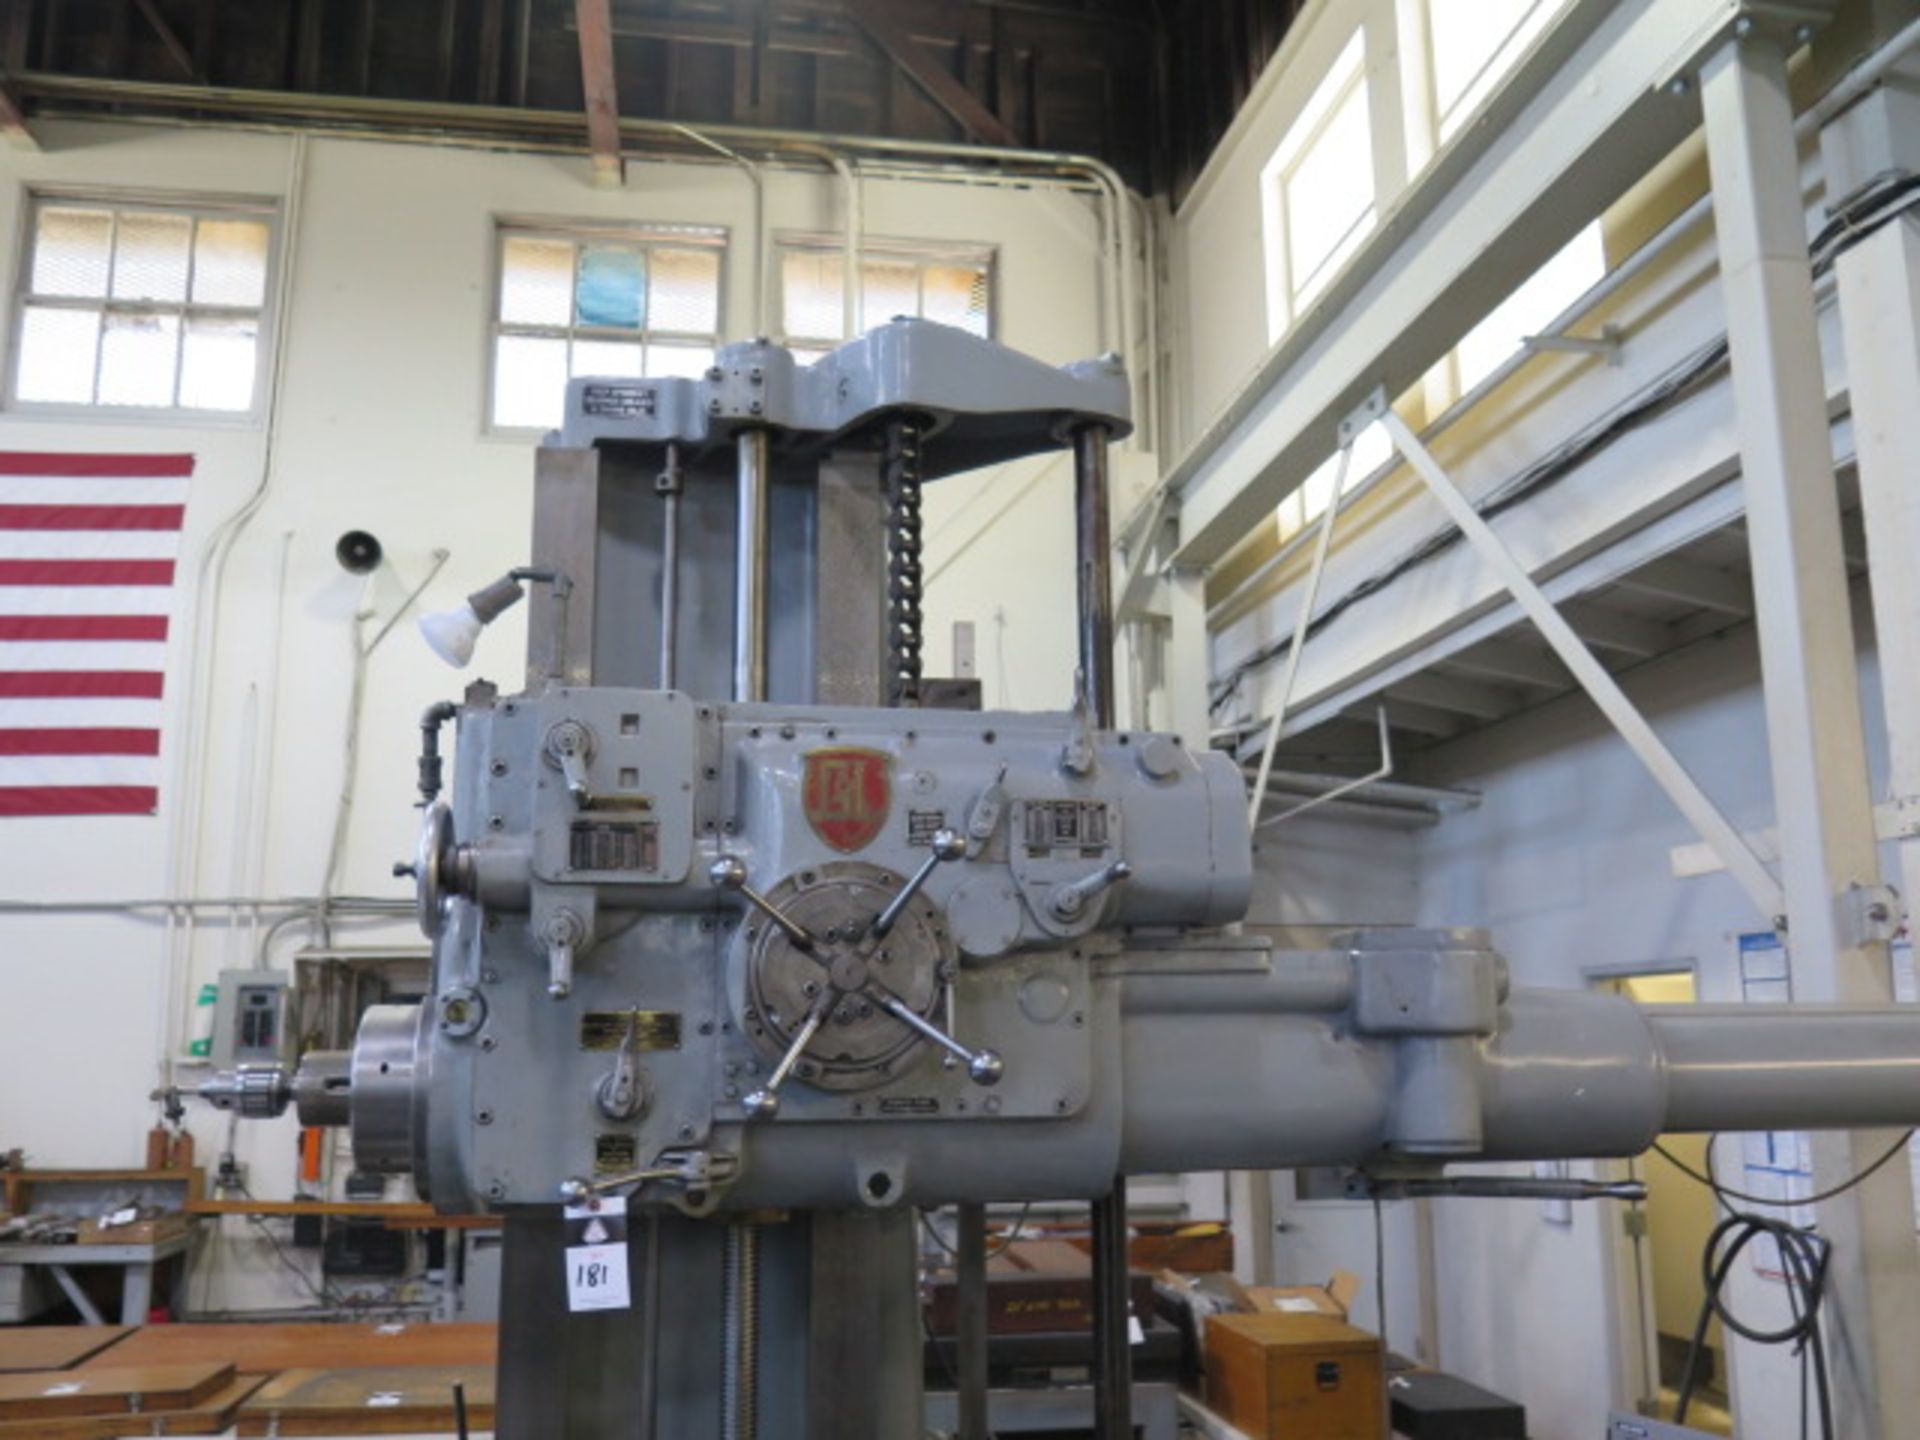 Giddings & Lewis 340-T Horizontal Boring Mill w/ Acu-Rite 4-Axis DRO, 4” Spindle, SOLD AS IS - Image 5 of 16